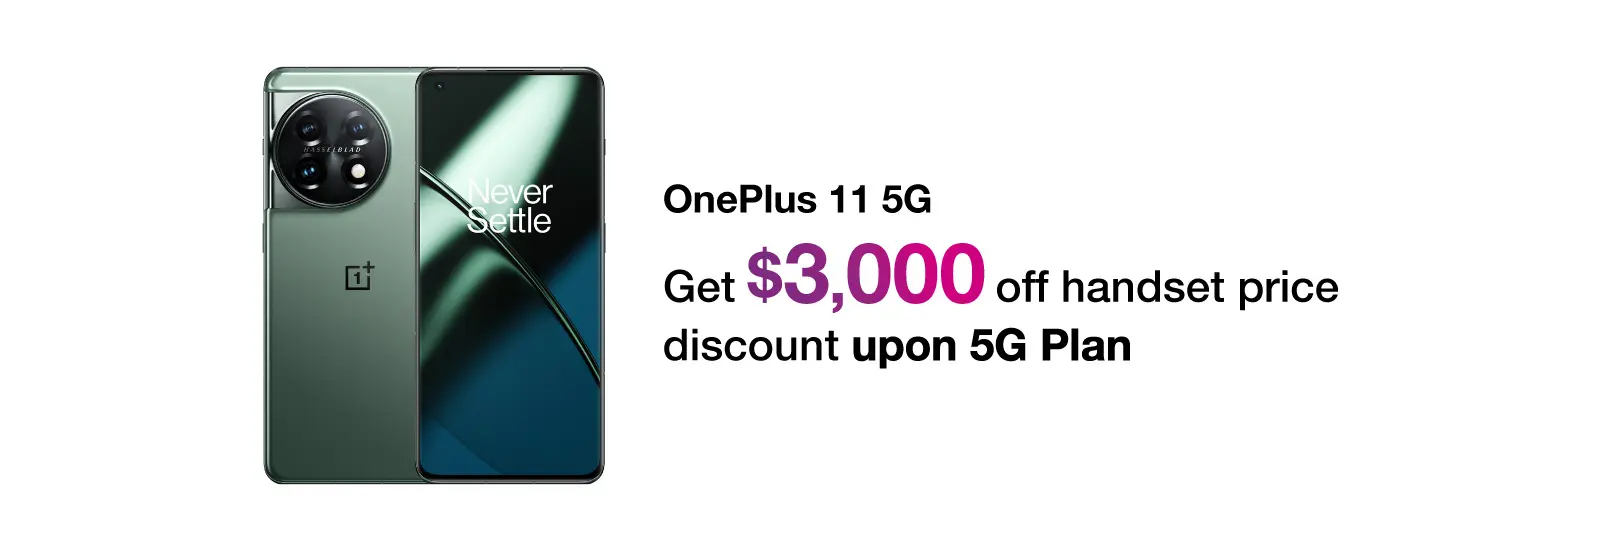 Subscribe Handset Voucher Plan to enjoy up to $3,000 value. Buy now!